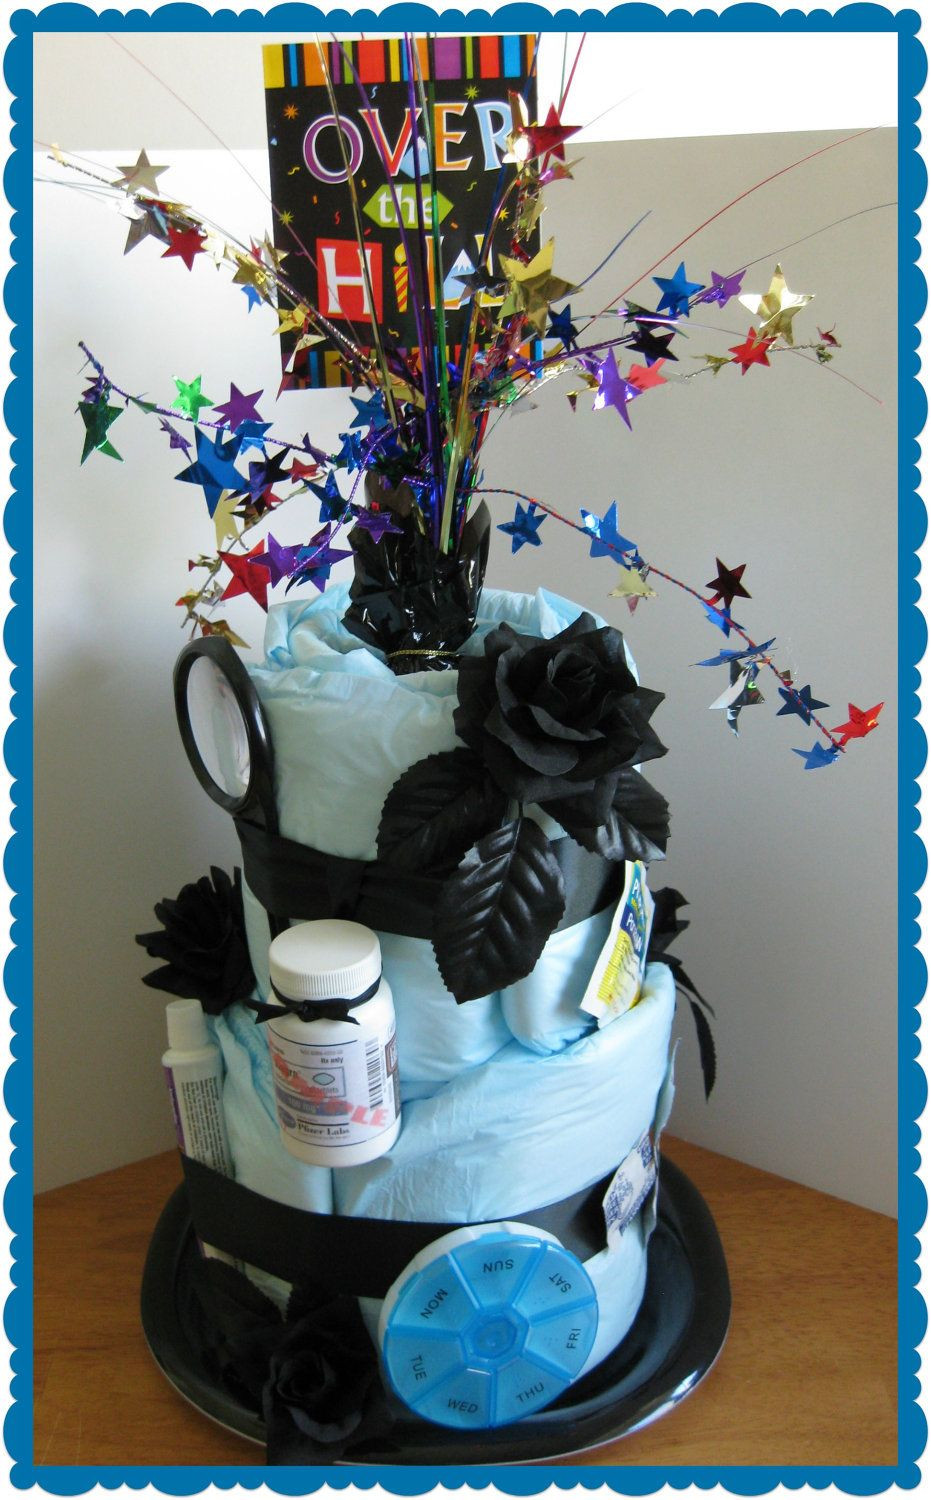 40th Birthday Gag Gifts
 Over the Hill Gag Gift Birthday Diaper Cake for